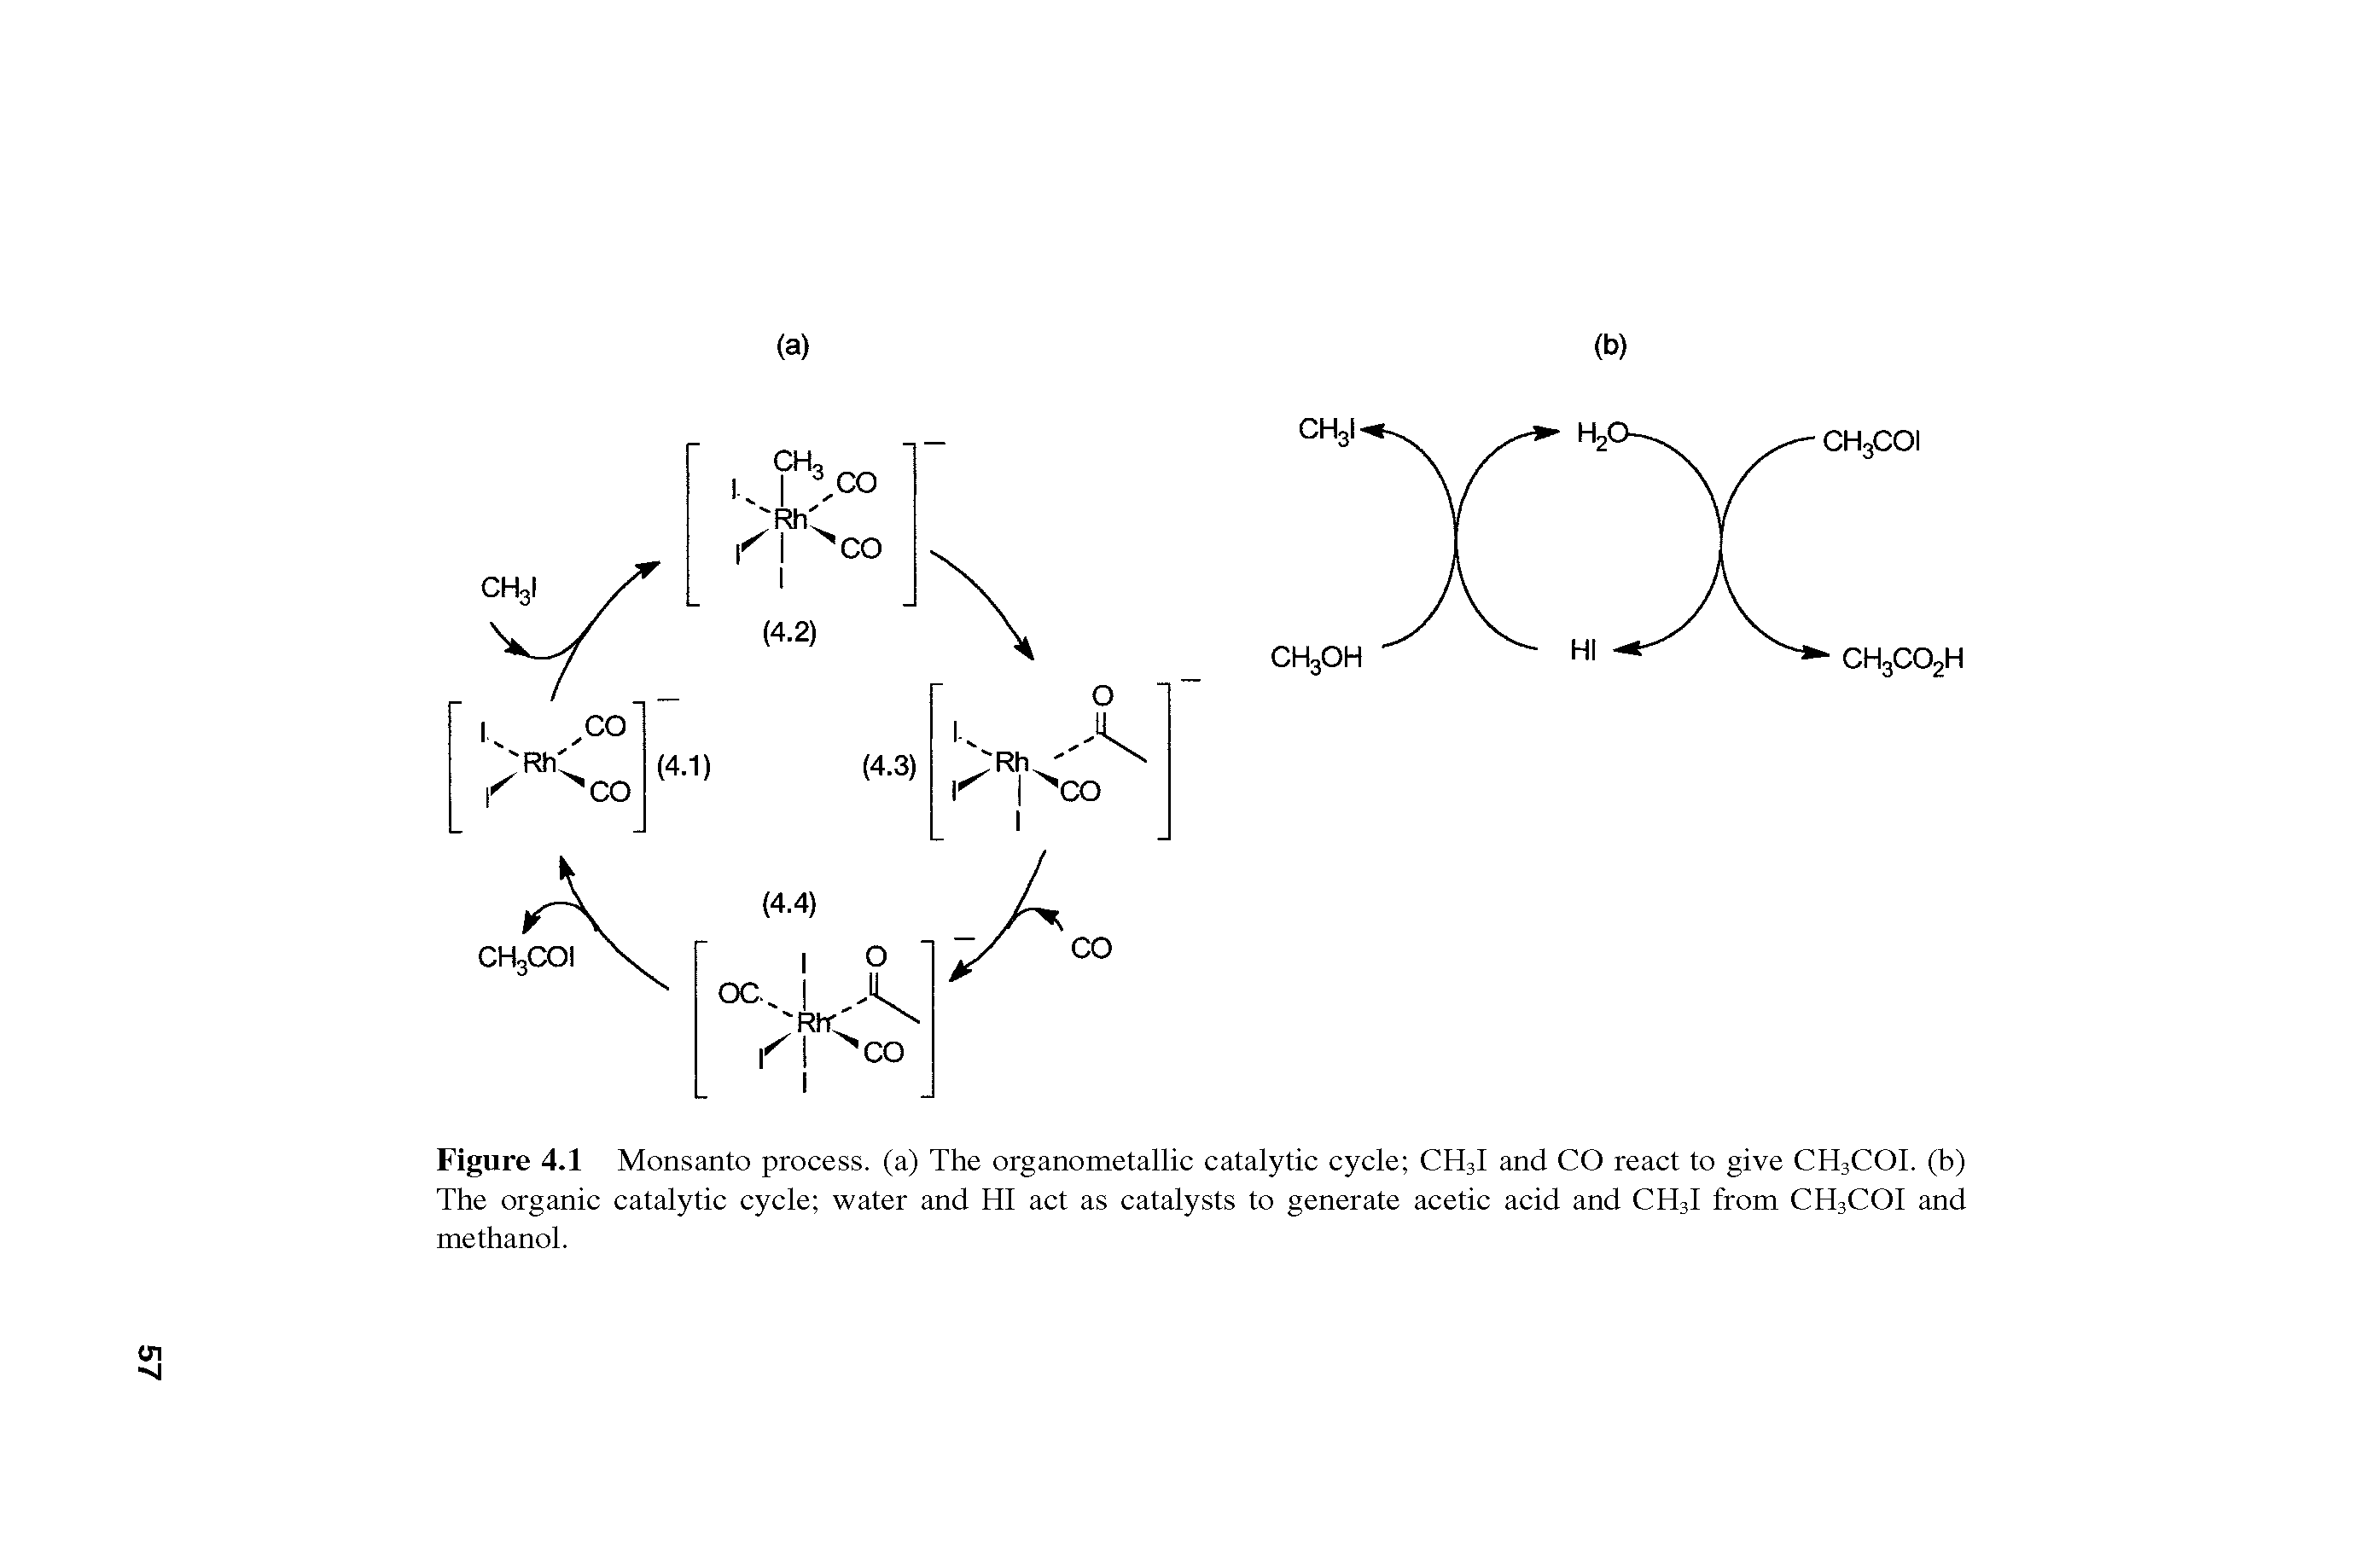 Figure 4.1 Monsanto process, (a) The organometallic catalytic cycle CH3I and CO react to give CH3COI. (b) The organic catalytic cycle water and HI act as catalysts to generate acetic acid and CH3I from CH3COI and methanol.